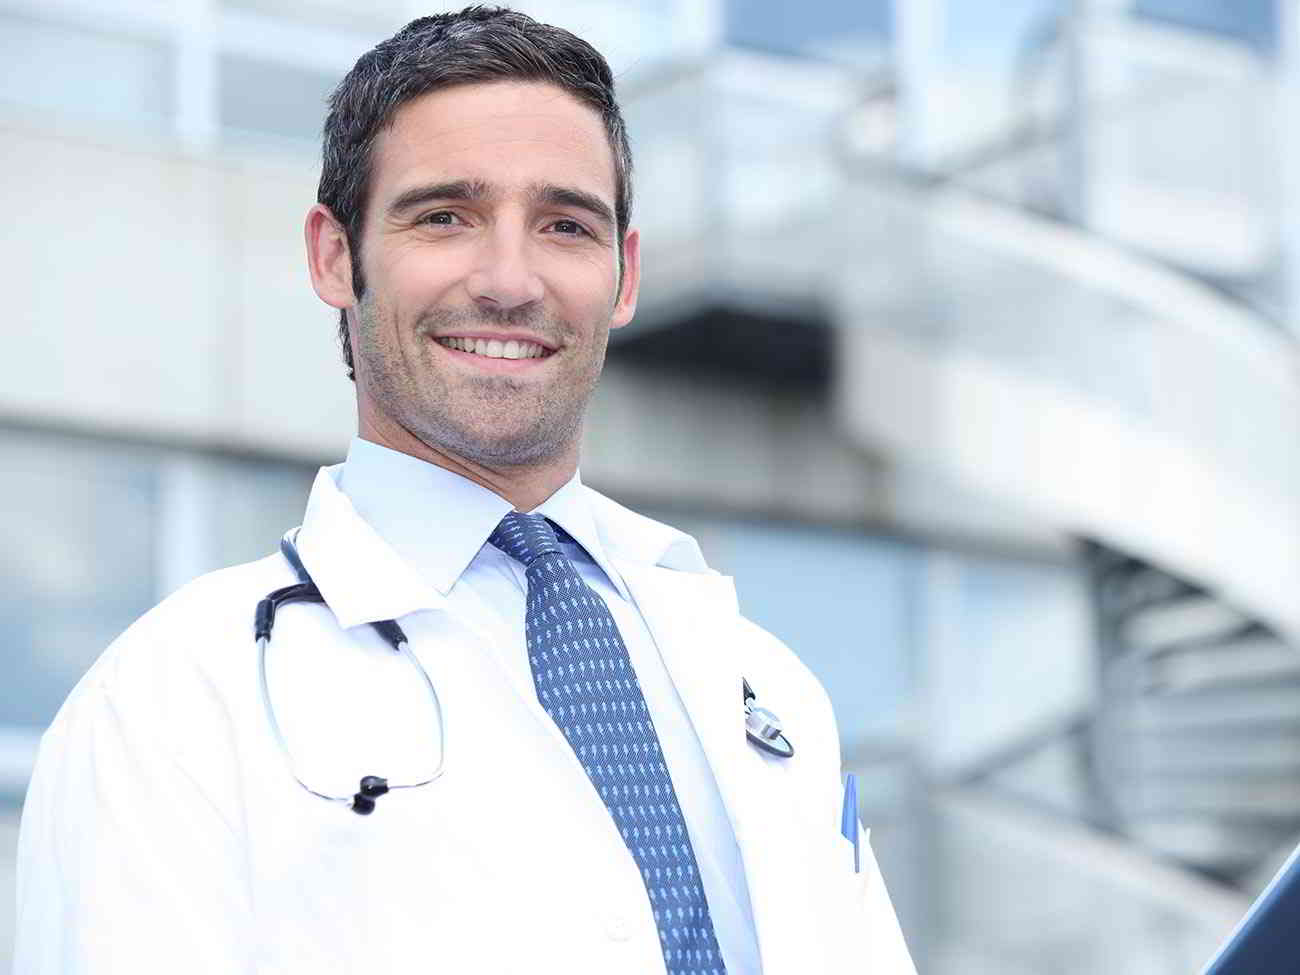 small business physician practice